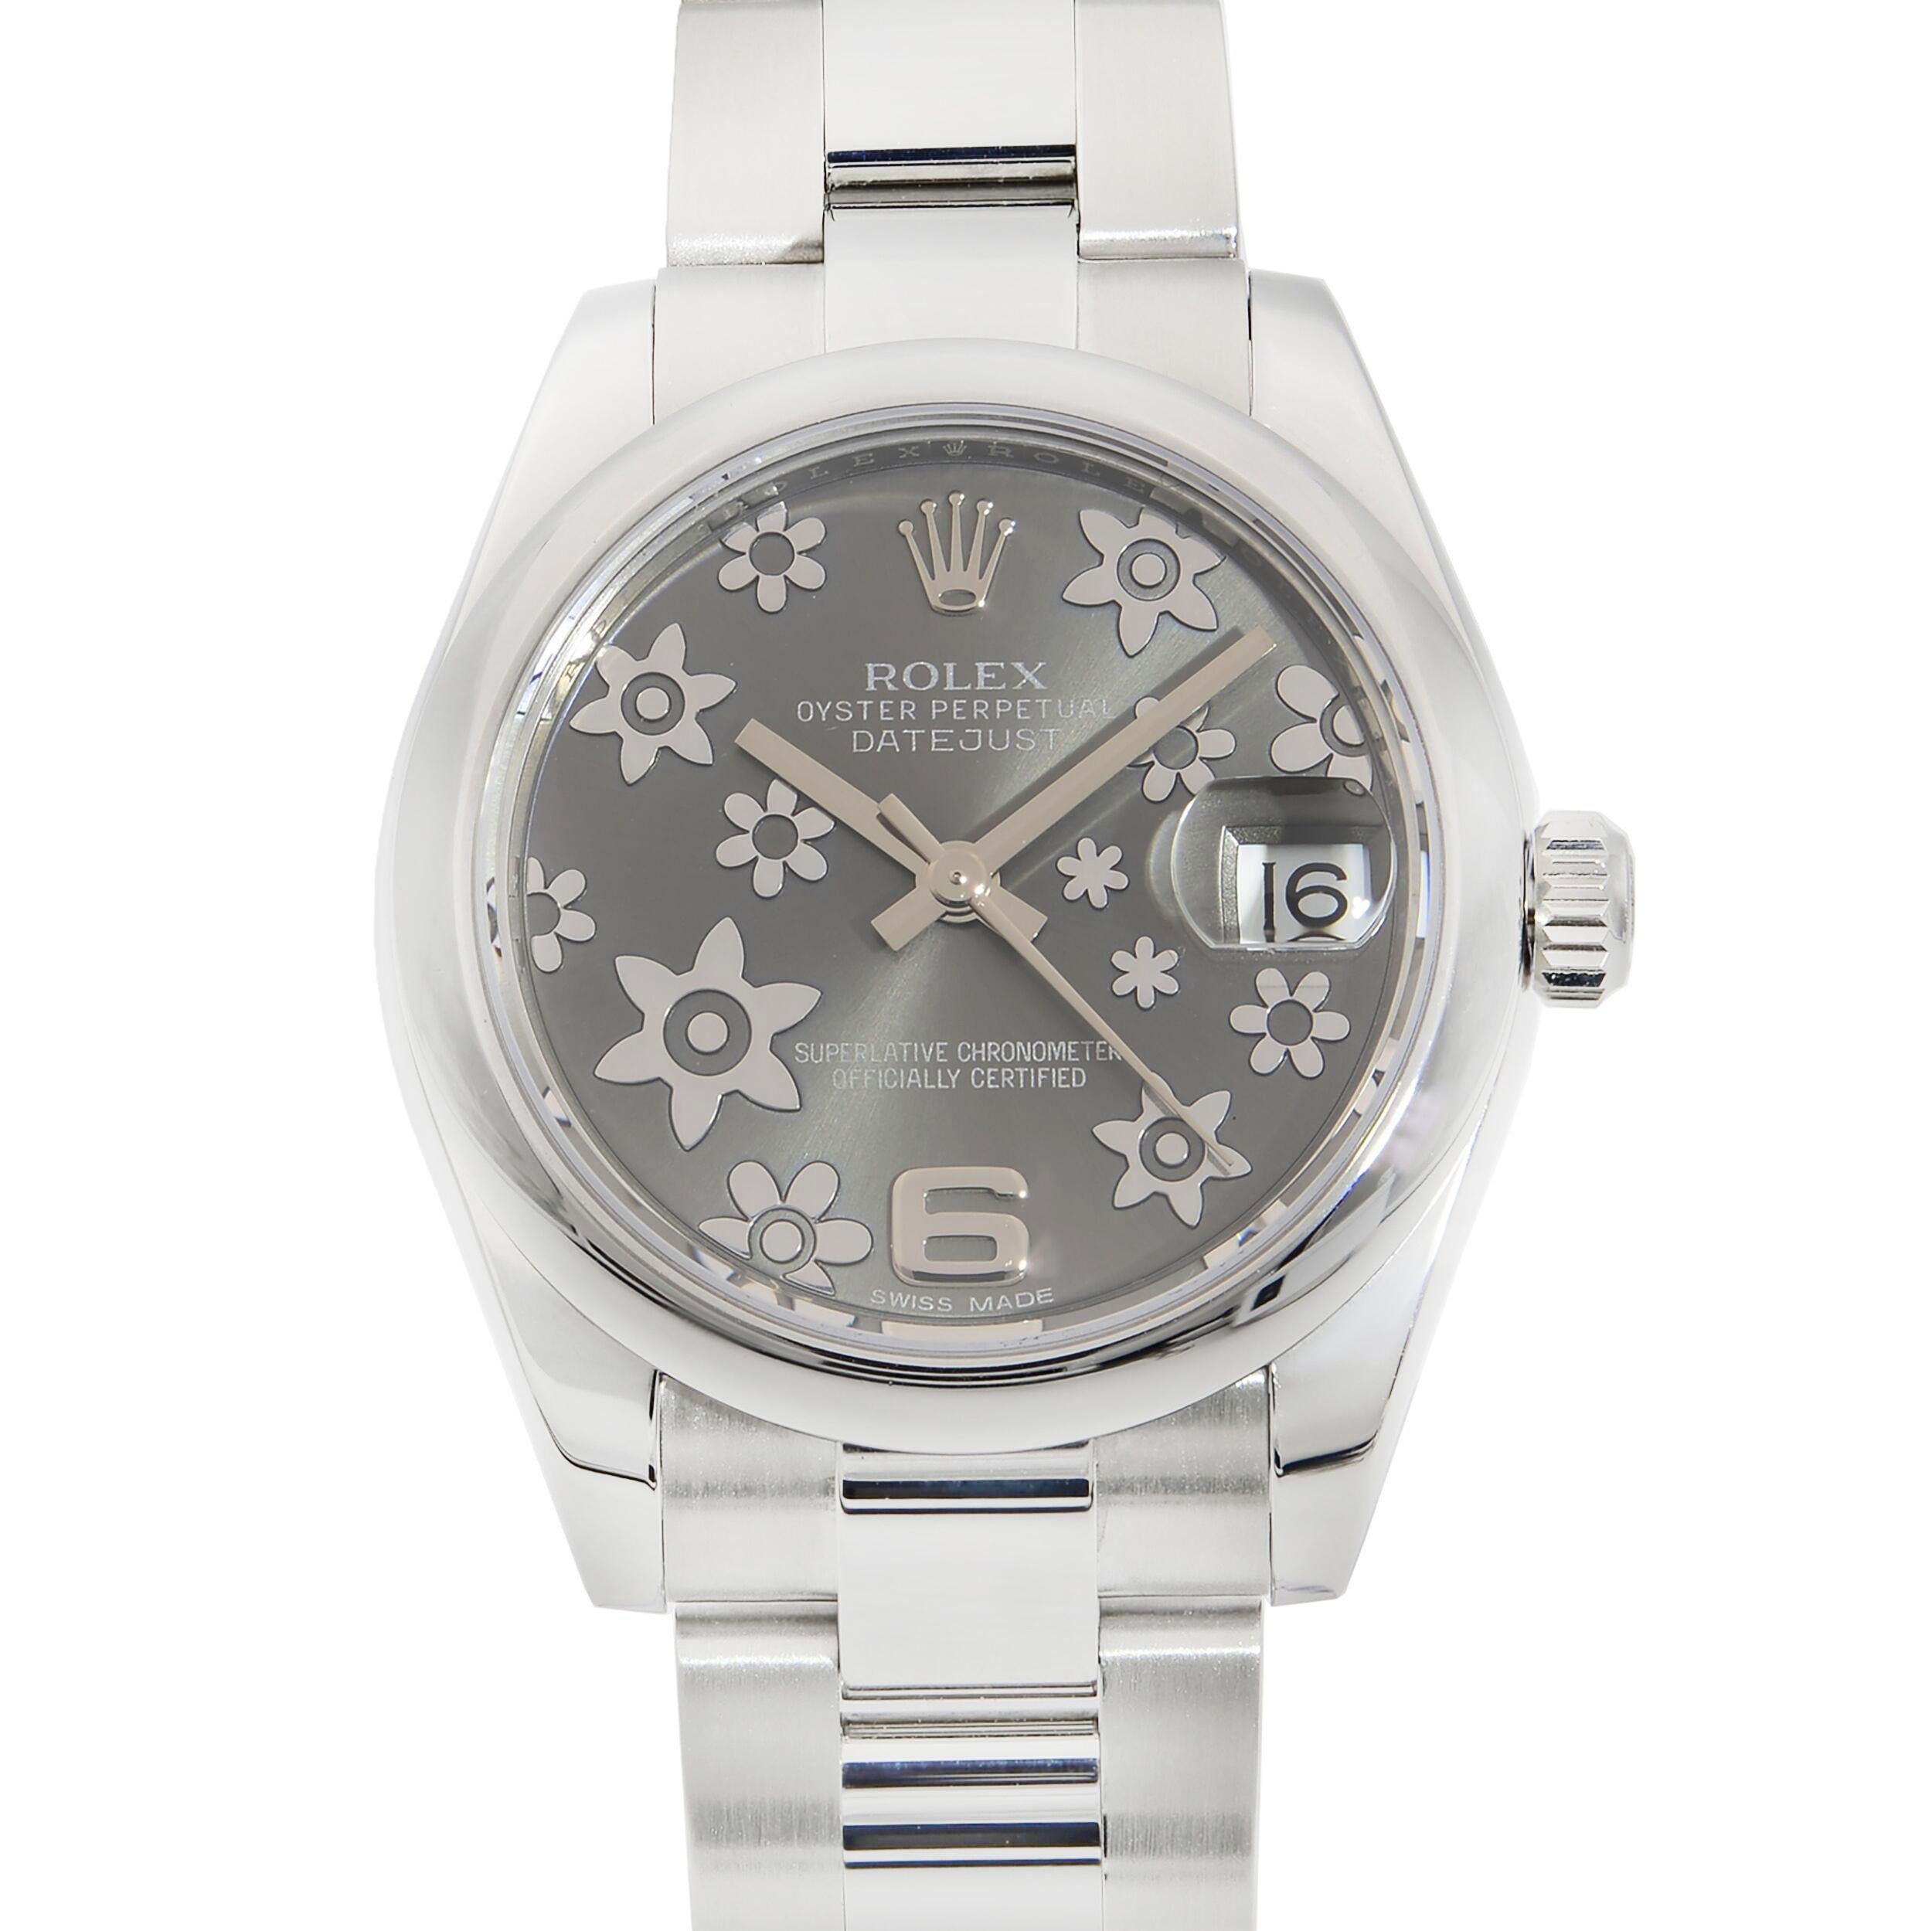 This pre-owned Rolex Datejust 178240RFO is a beautiful Ladie's timepiece that is powered by mechanical (automatic) movement which is cased in a stainless steel case. It has a round shape face, date indicator dial and has hand arabic numerals,